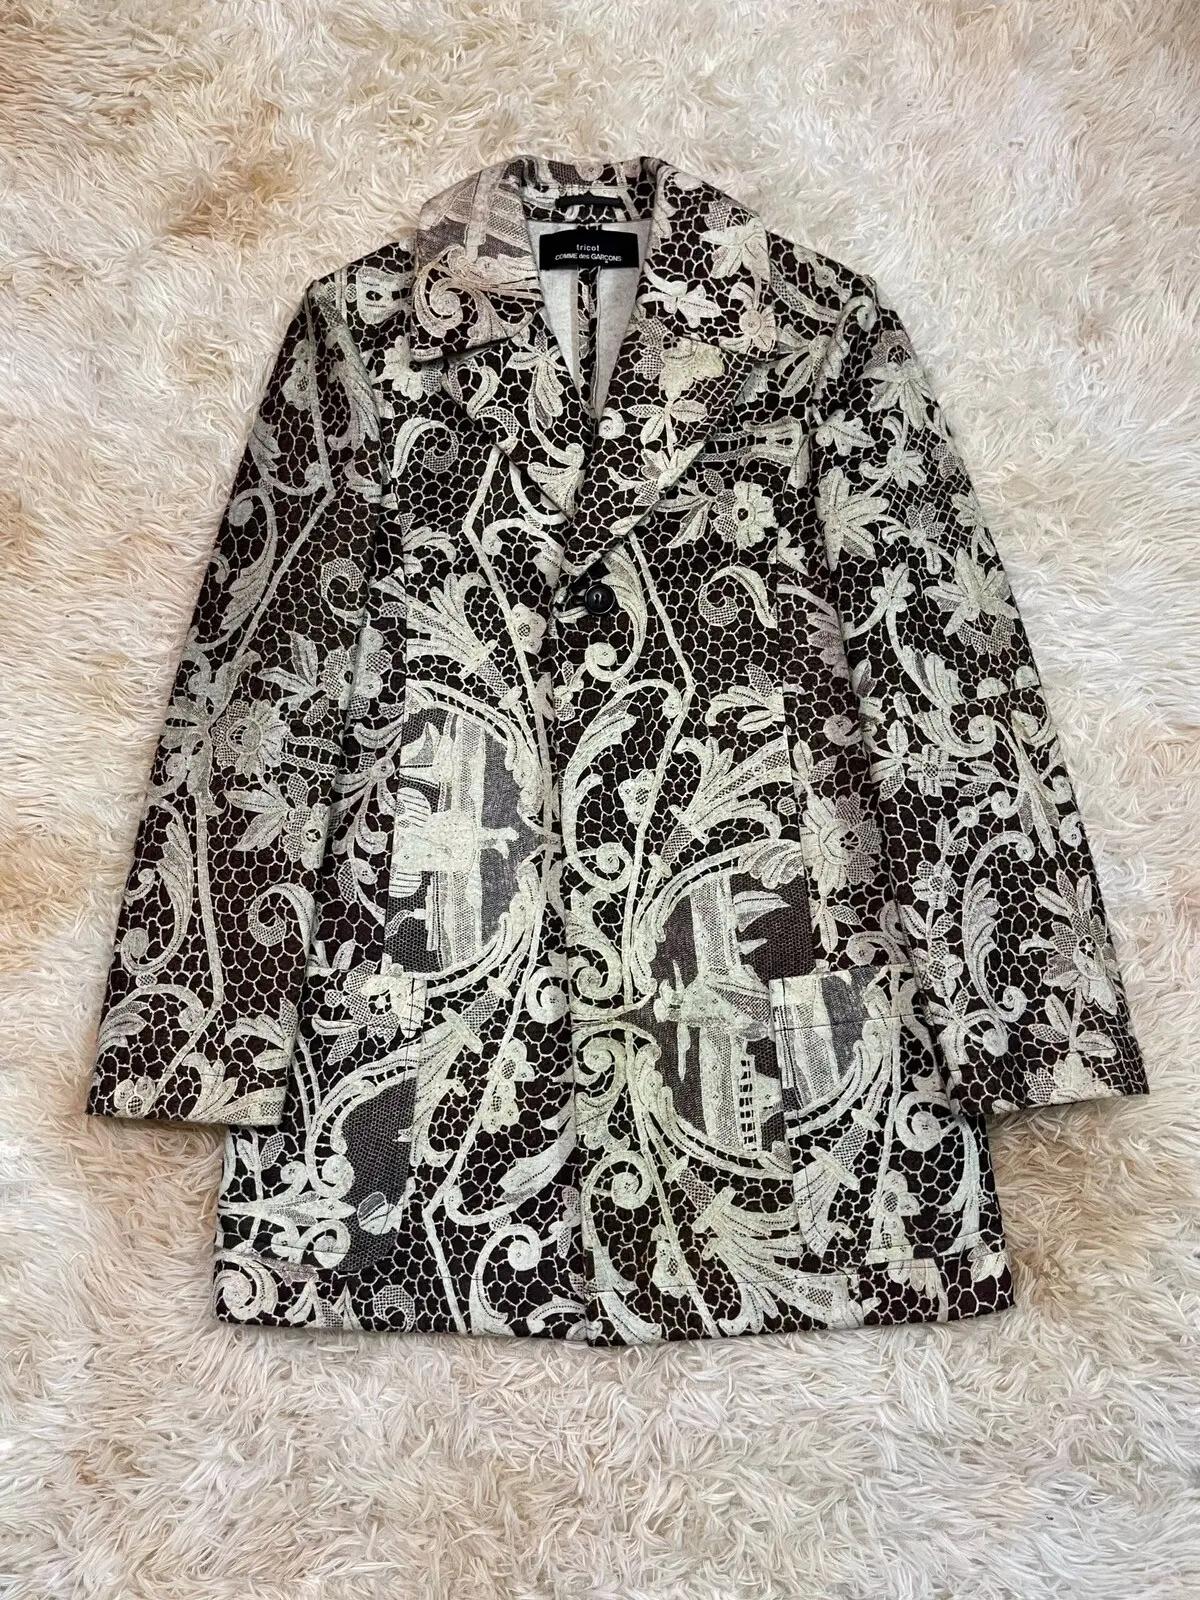 Sophisticated piece by Tao Kurihara, vintage condition with some signs of usage but without heavy alteration or damages.

Size: Medium, please check our measurements.

Condition: 8,5/10

Feels free to message me with any questions regarding